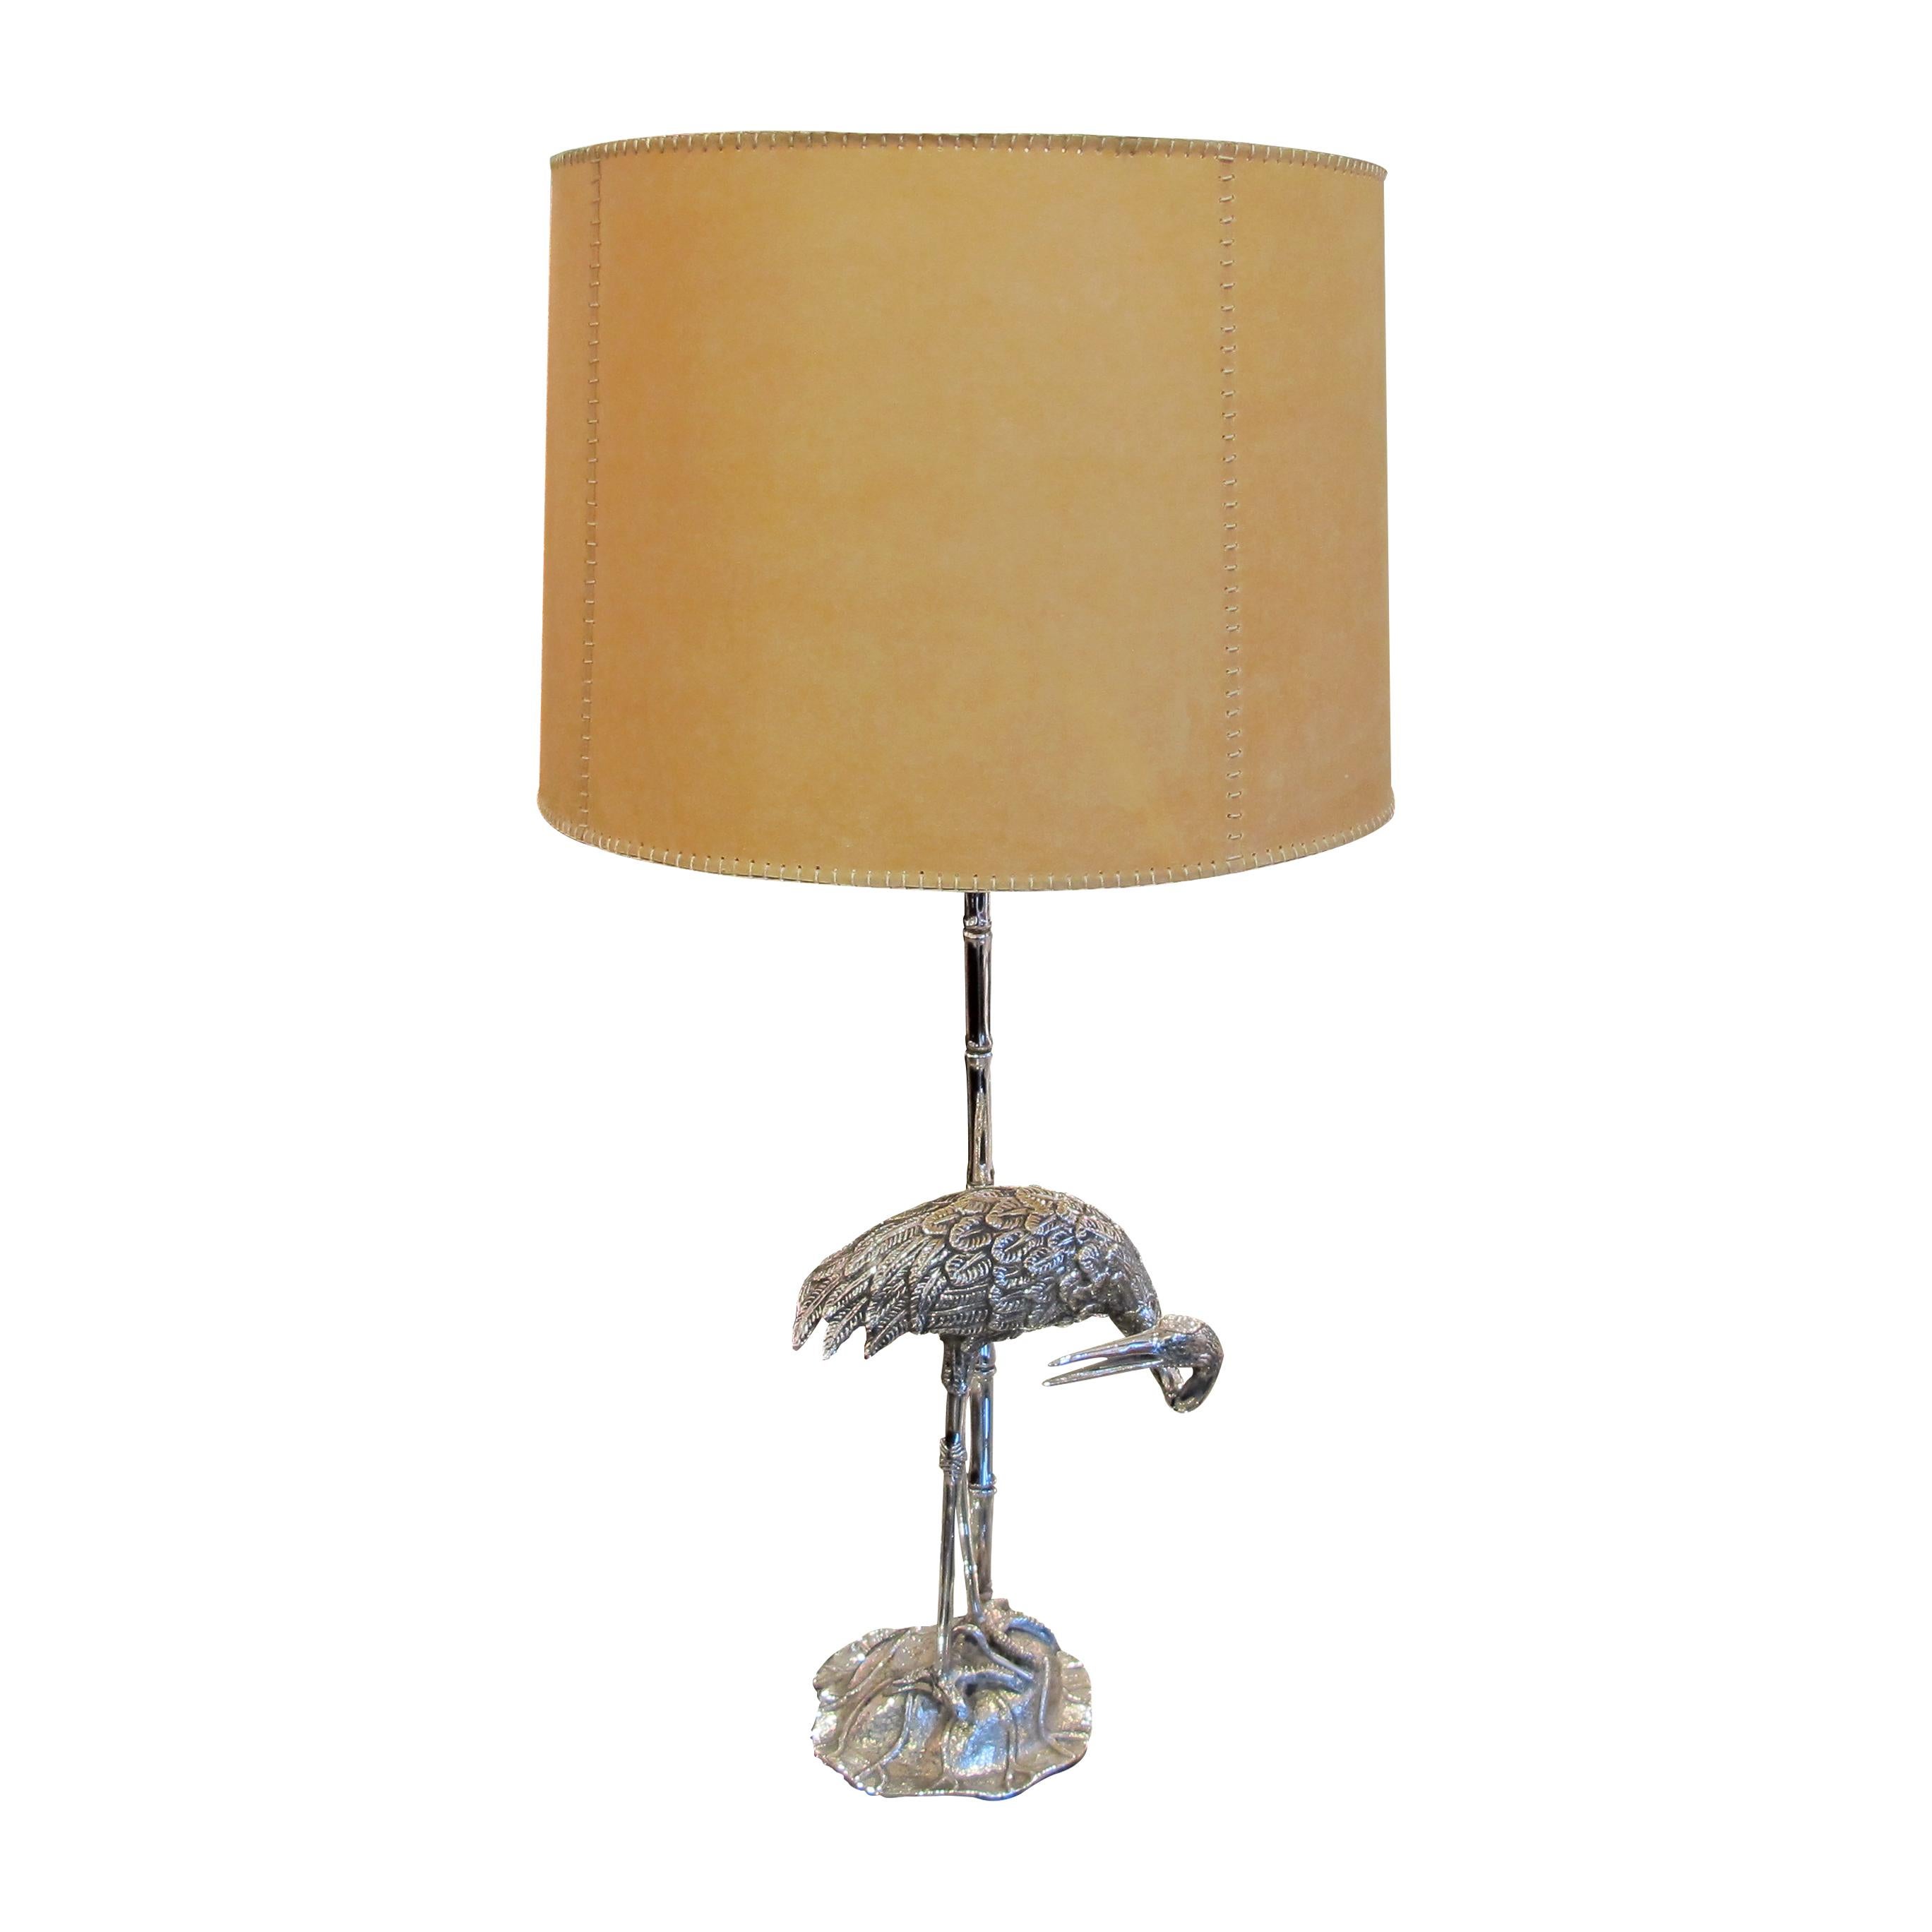 A pair of 1960s Spanish silver plated Heron bronze table lamps by Valenti with handmade parchment shades. The lamps are a real statement of elegance with the beautiful curves and details of the herons' resting on silver plated bronze faux bamboo